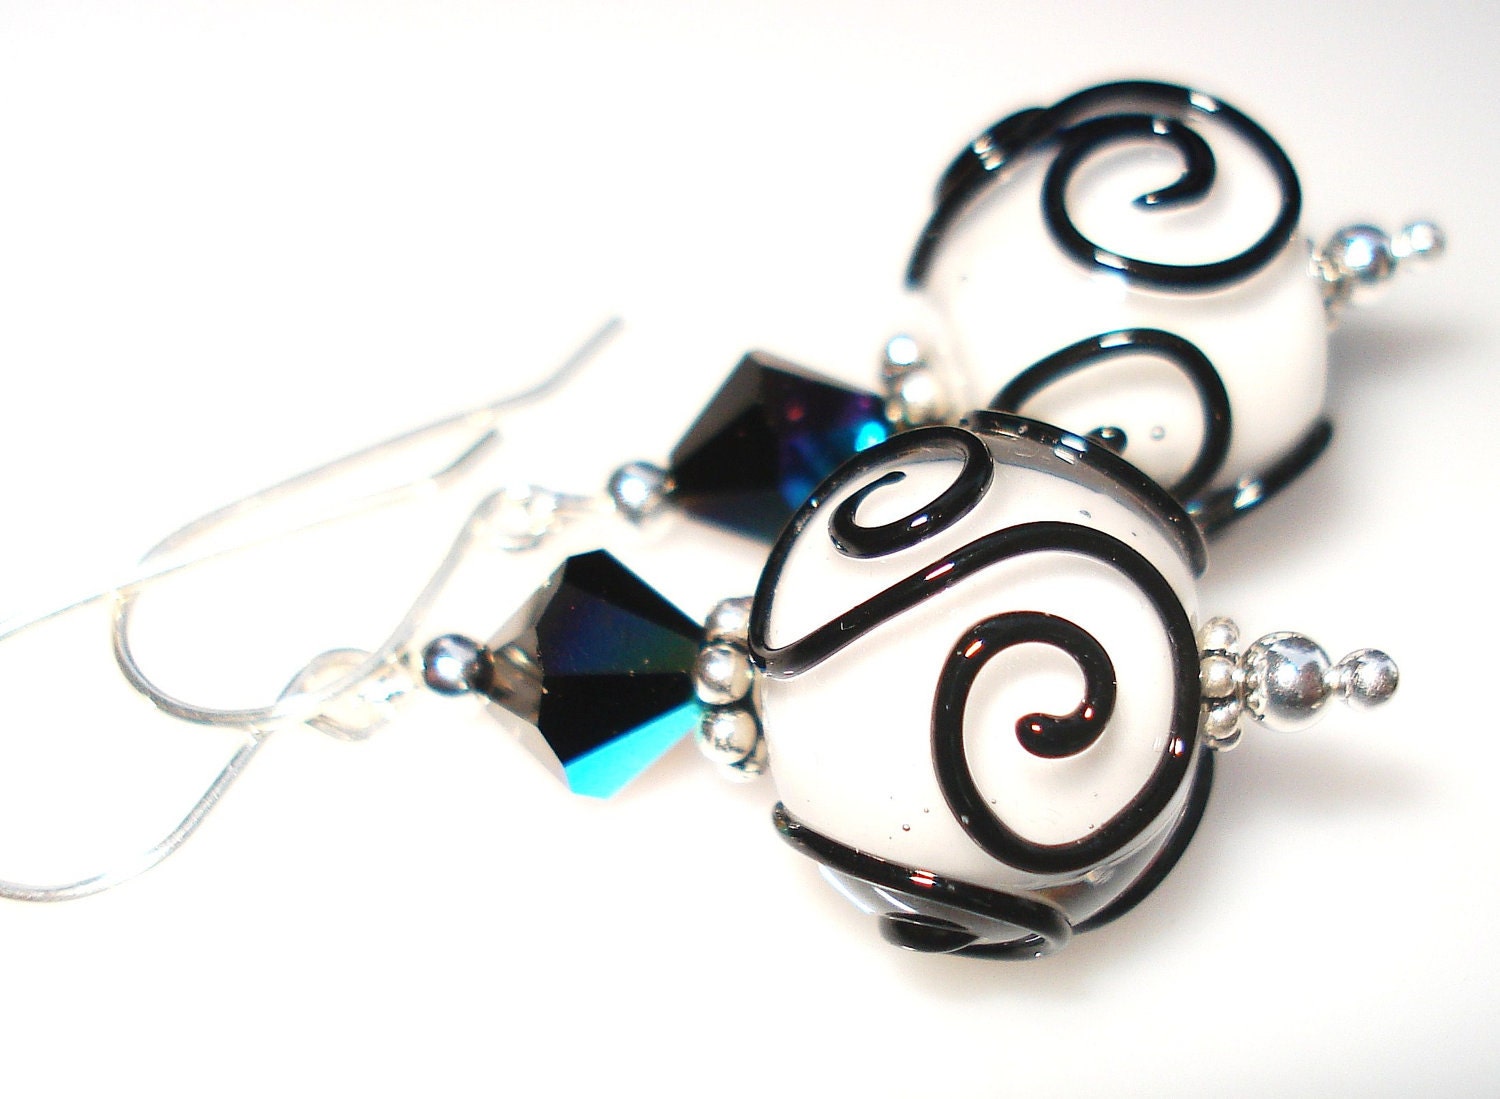 A Black Tie Affair, Handcrafted Jewelry, Handmade Earrings with White Glass Lampwork Beads and Black Scrolls, Sterling Silver